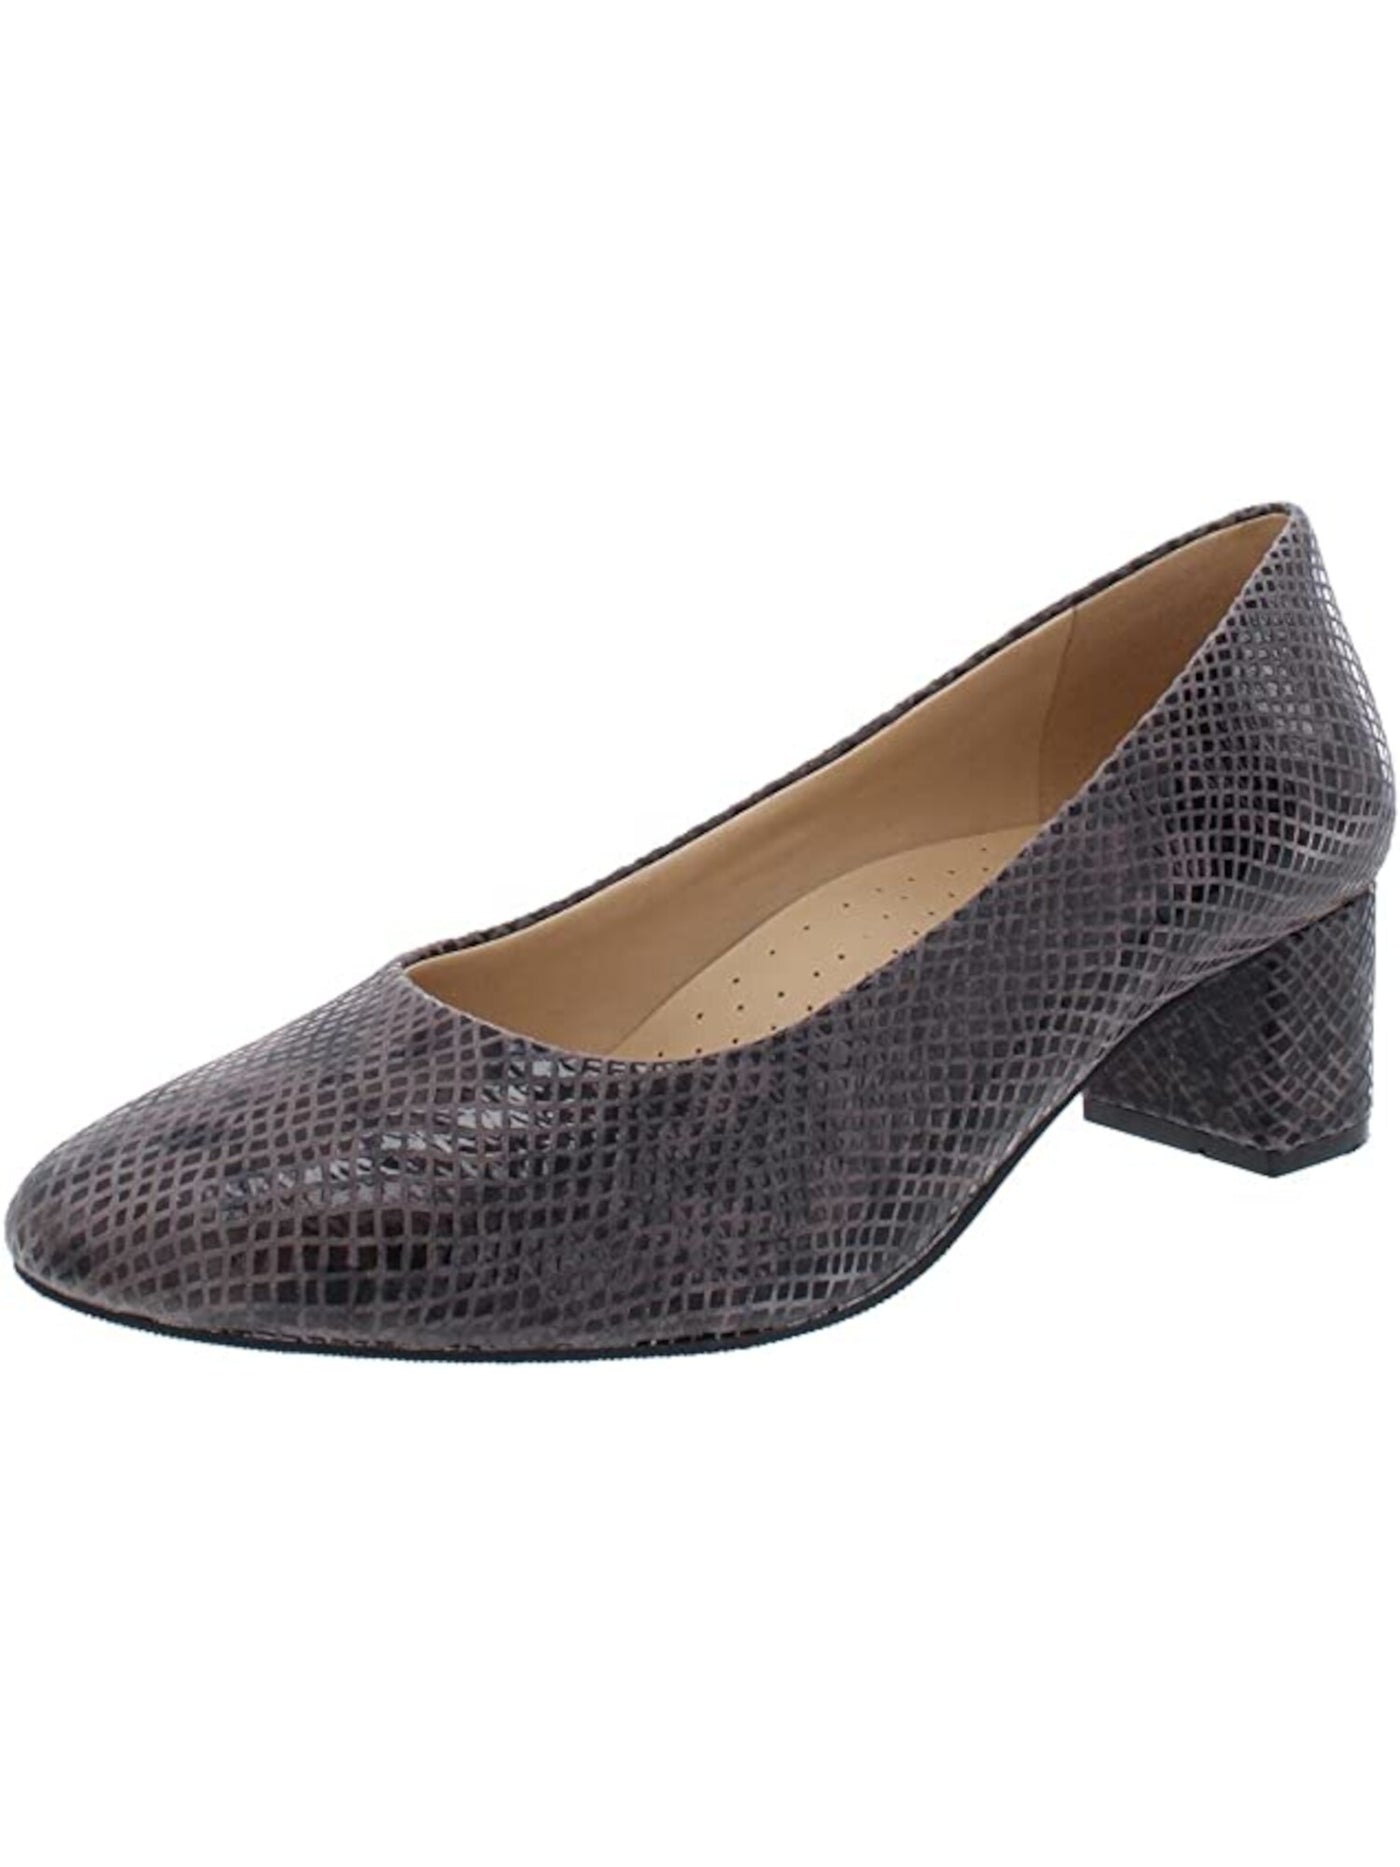 TROTTERS Womens Gray Snake Print Cushioned Kari Pointed Toe Block Heel Slip On Leather Dress Pumps Shoes 9.5 W